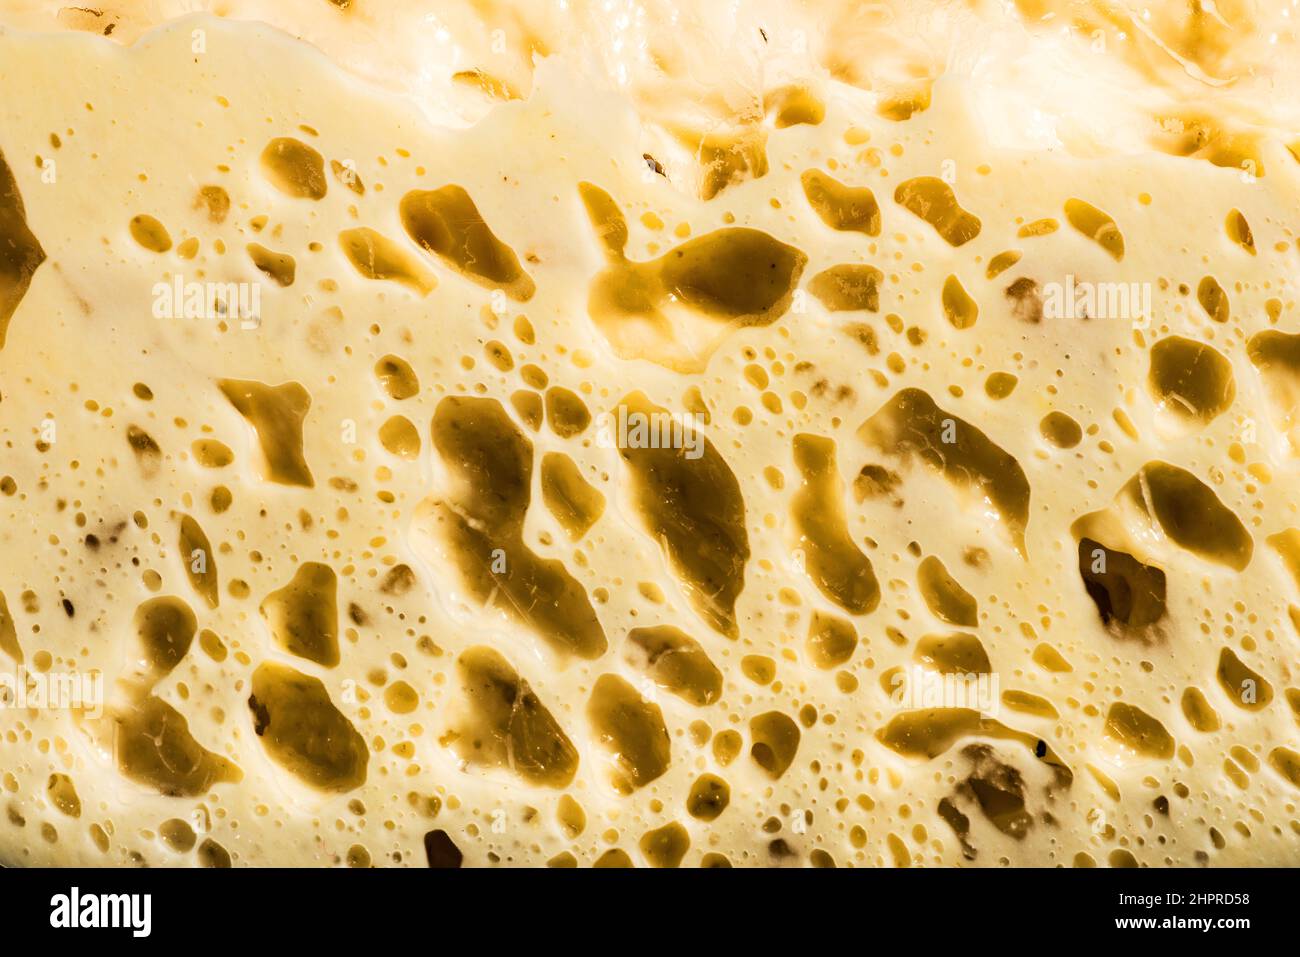 the natural yeast rises and creates bubbles in the dough Stock Photo